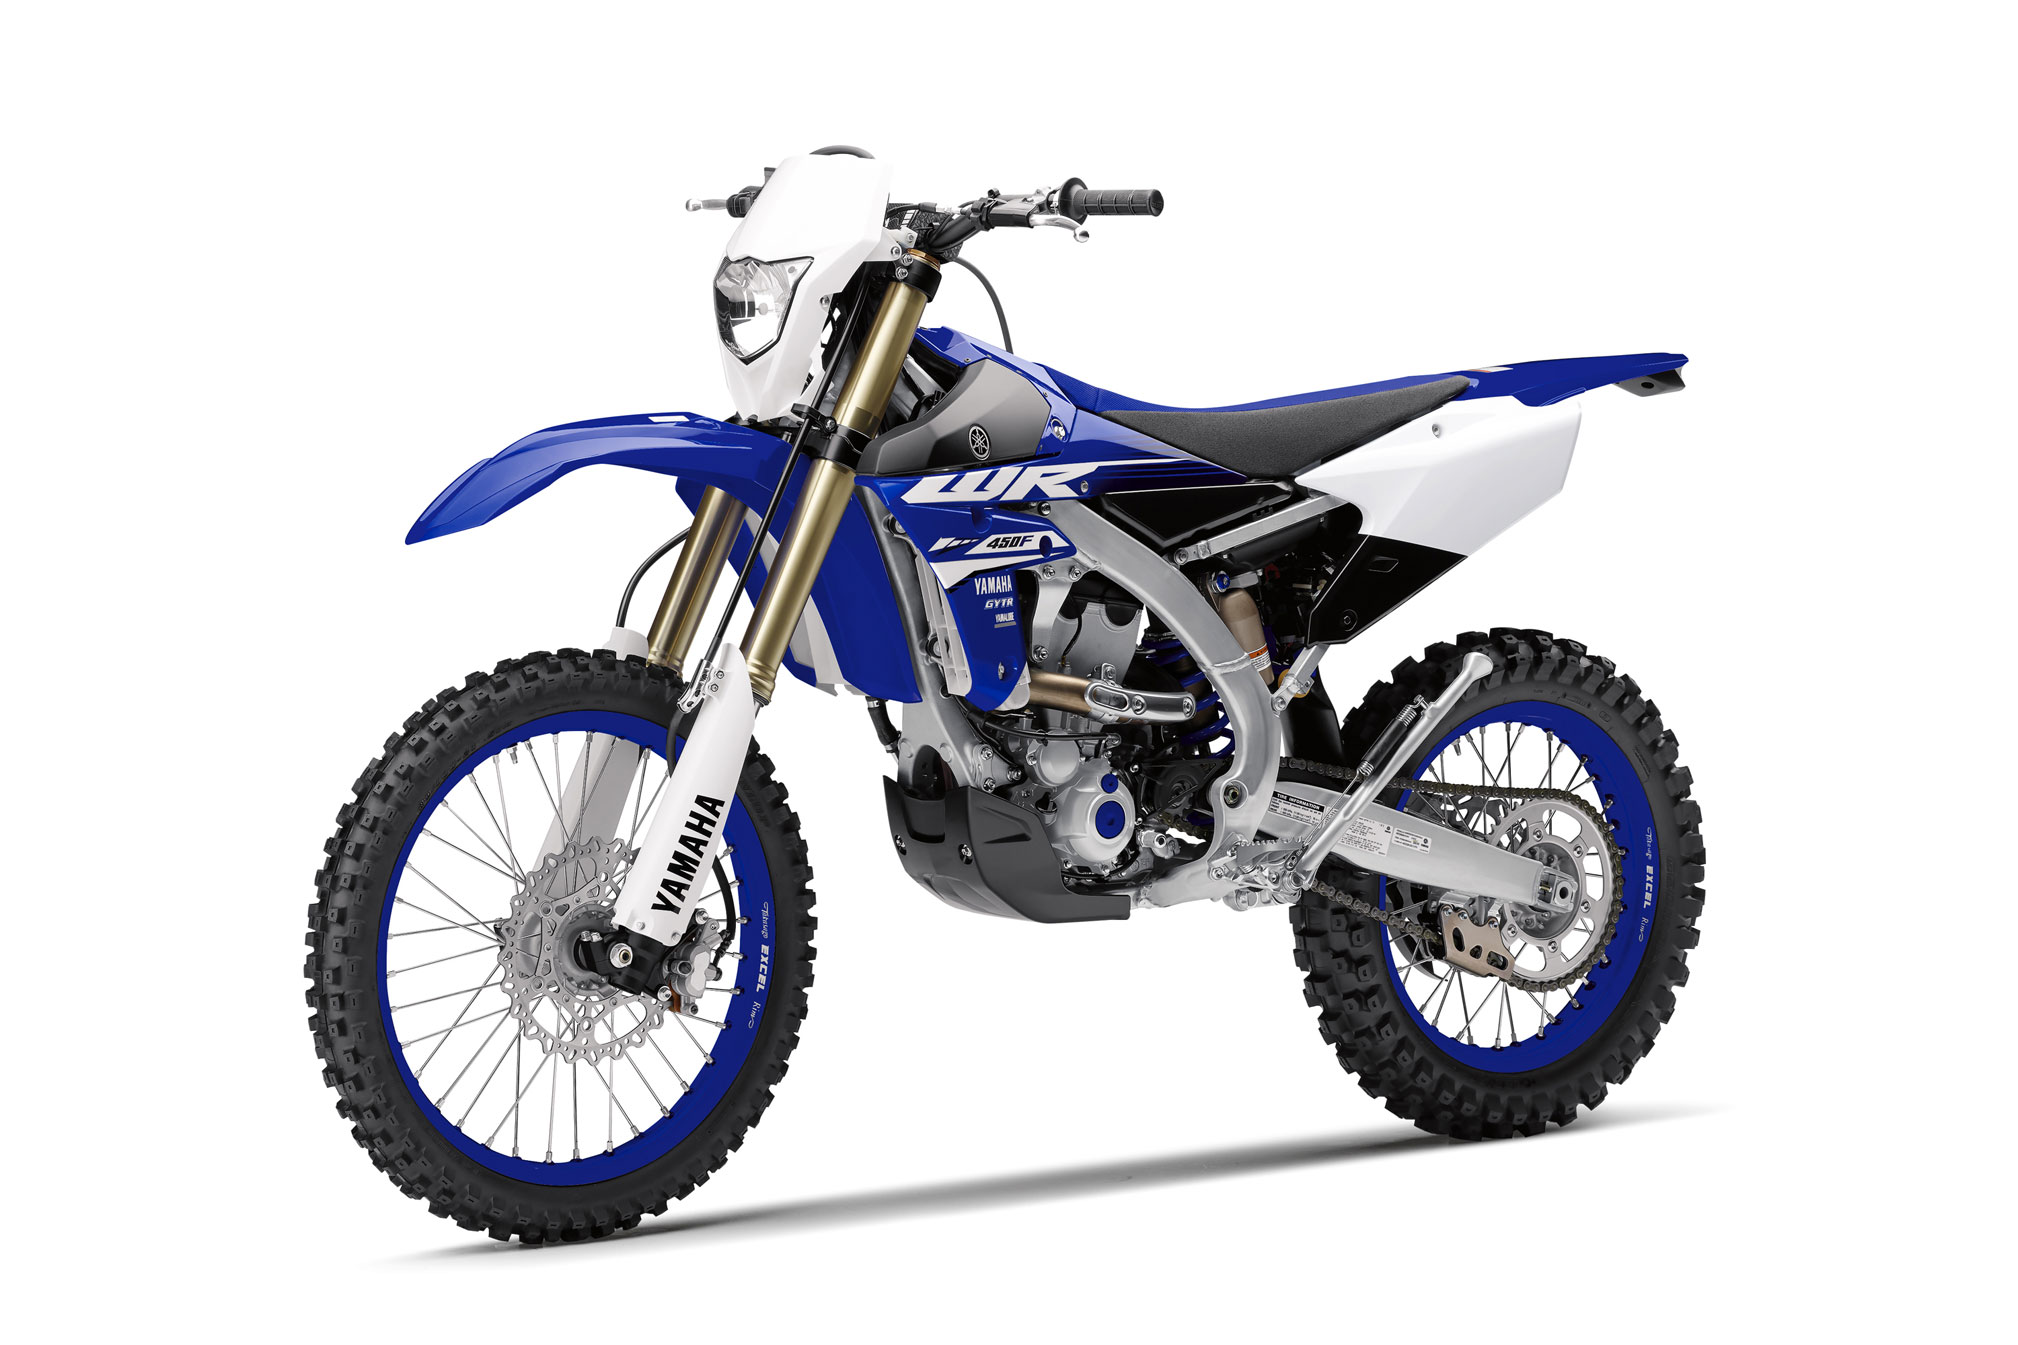 2018 Yamaha WR450F First Look | 6 Fast Facts